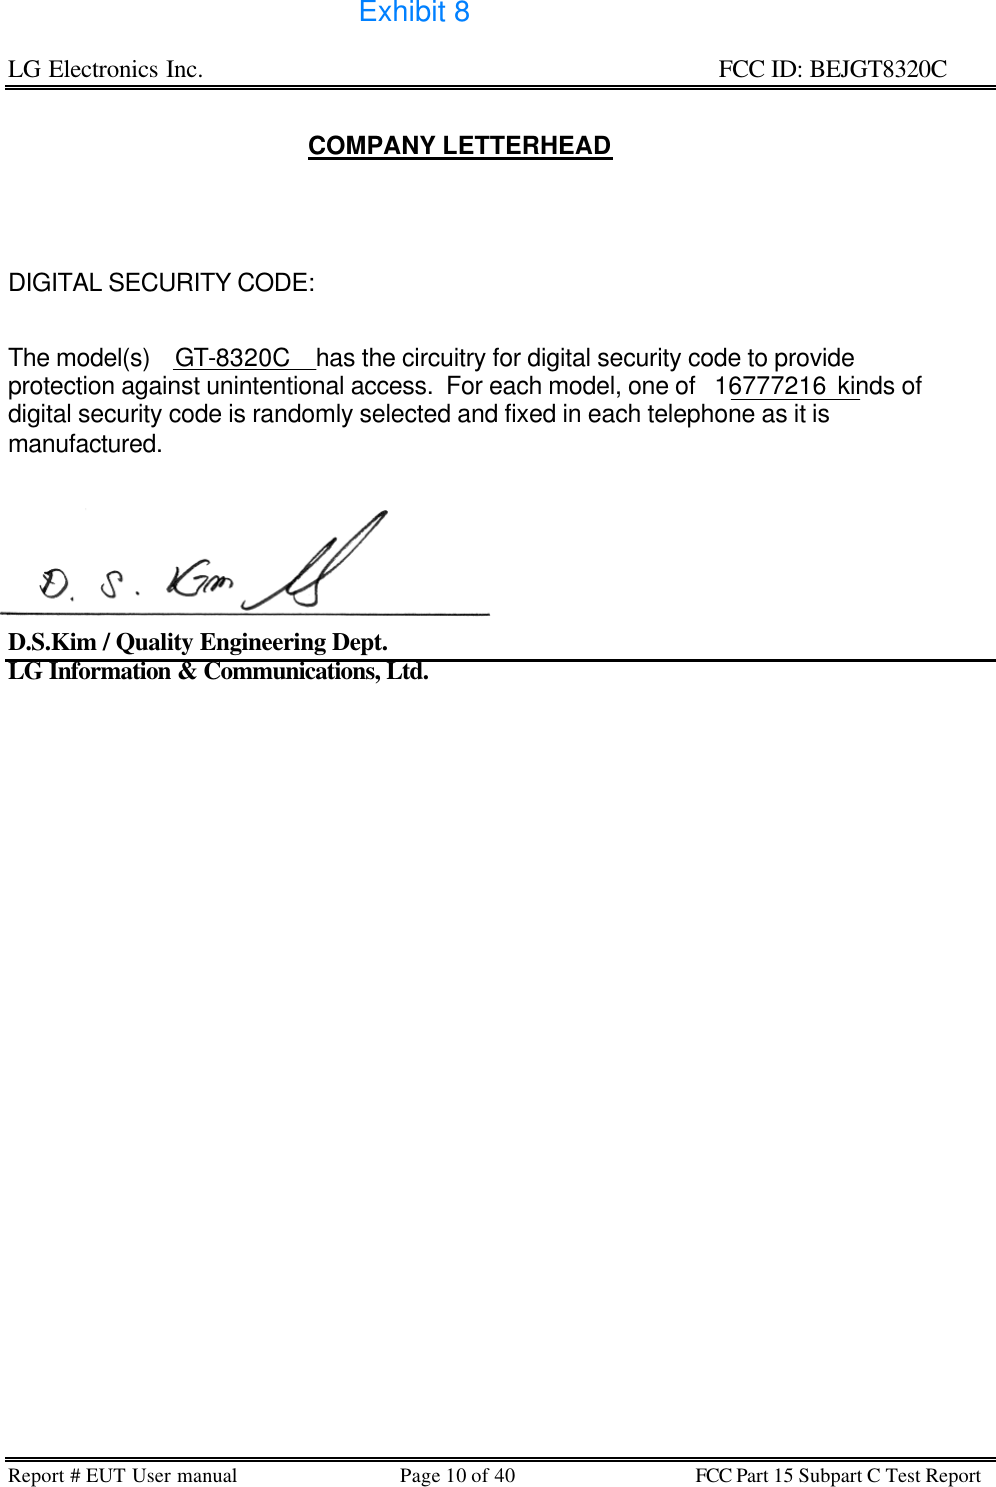 LG Electronics Inc.                                                                                                   FCC ID: BEJGT8320C Report # EUT User manual Page 10 of 40 FCC Part 15 Subpart C Test Report    COMPANY LETTERHEAD       DIGITAL SECURITY CODE:   The model(s)    GT-8320C    has the circuitry for digital security code to provide protection against unintentional access.  For each model, one of   16777216  kinds of digital security code is randomly selected and fixed in each telephone as it is manufactured.        D.S.Kim / Quality Engineering Dept. LG Information &amp; Communications, Ltd.          Exhibit 8